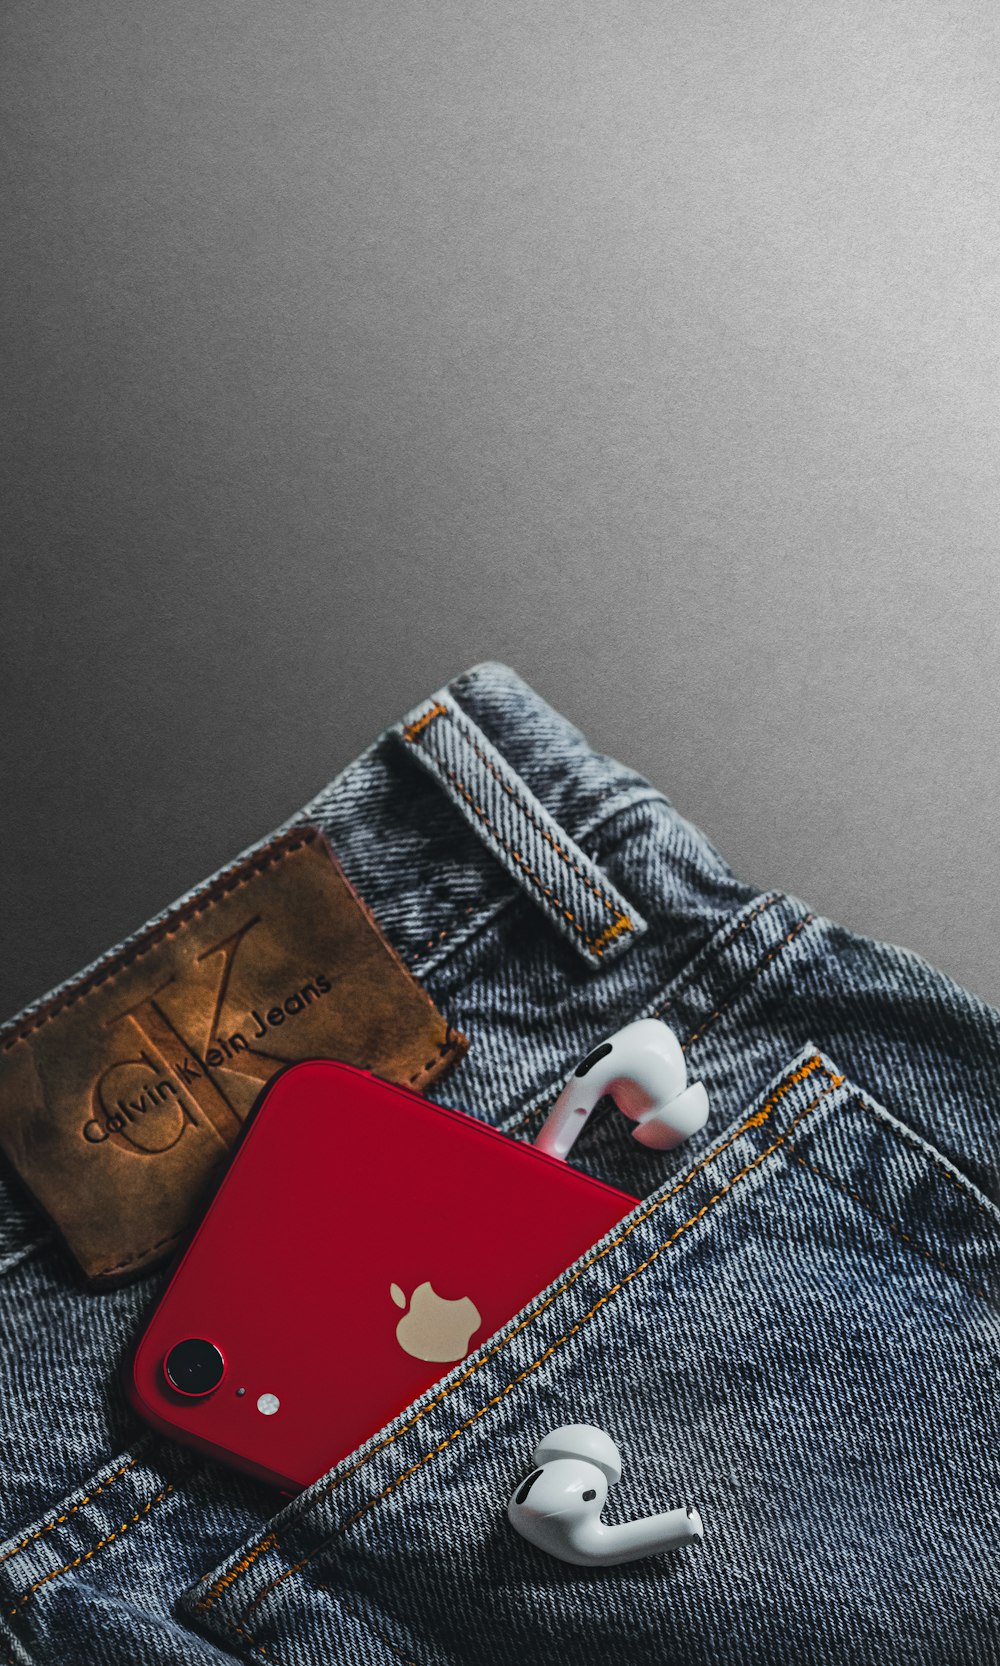 red and white card on blue denim jeans